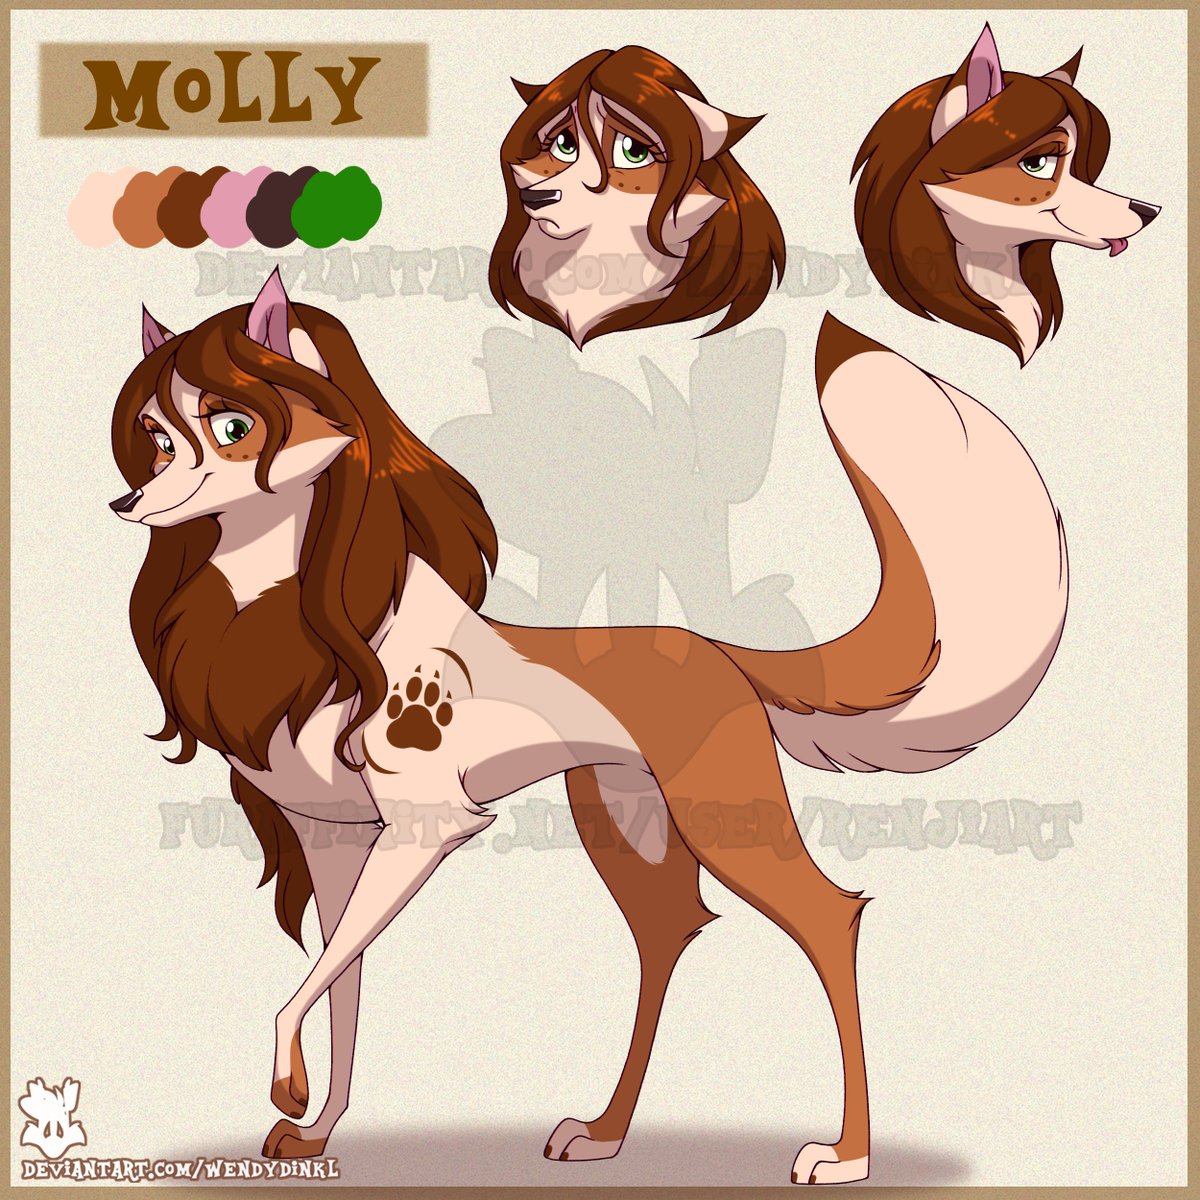 Adopt Doggy #4
If you want to order a commission/custom, write to me in direct message. Also ask you to follow the rules of authorship and not steal my art.
#art #artwork #artist #gidital #dog #canine #feral #reference #adopt #adoptable #oc #wolf #cartoon #artstyle #furry #anthro